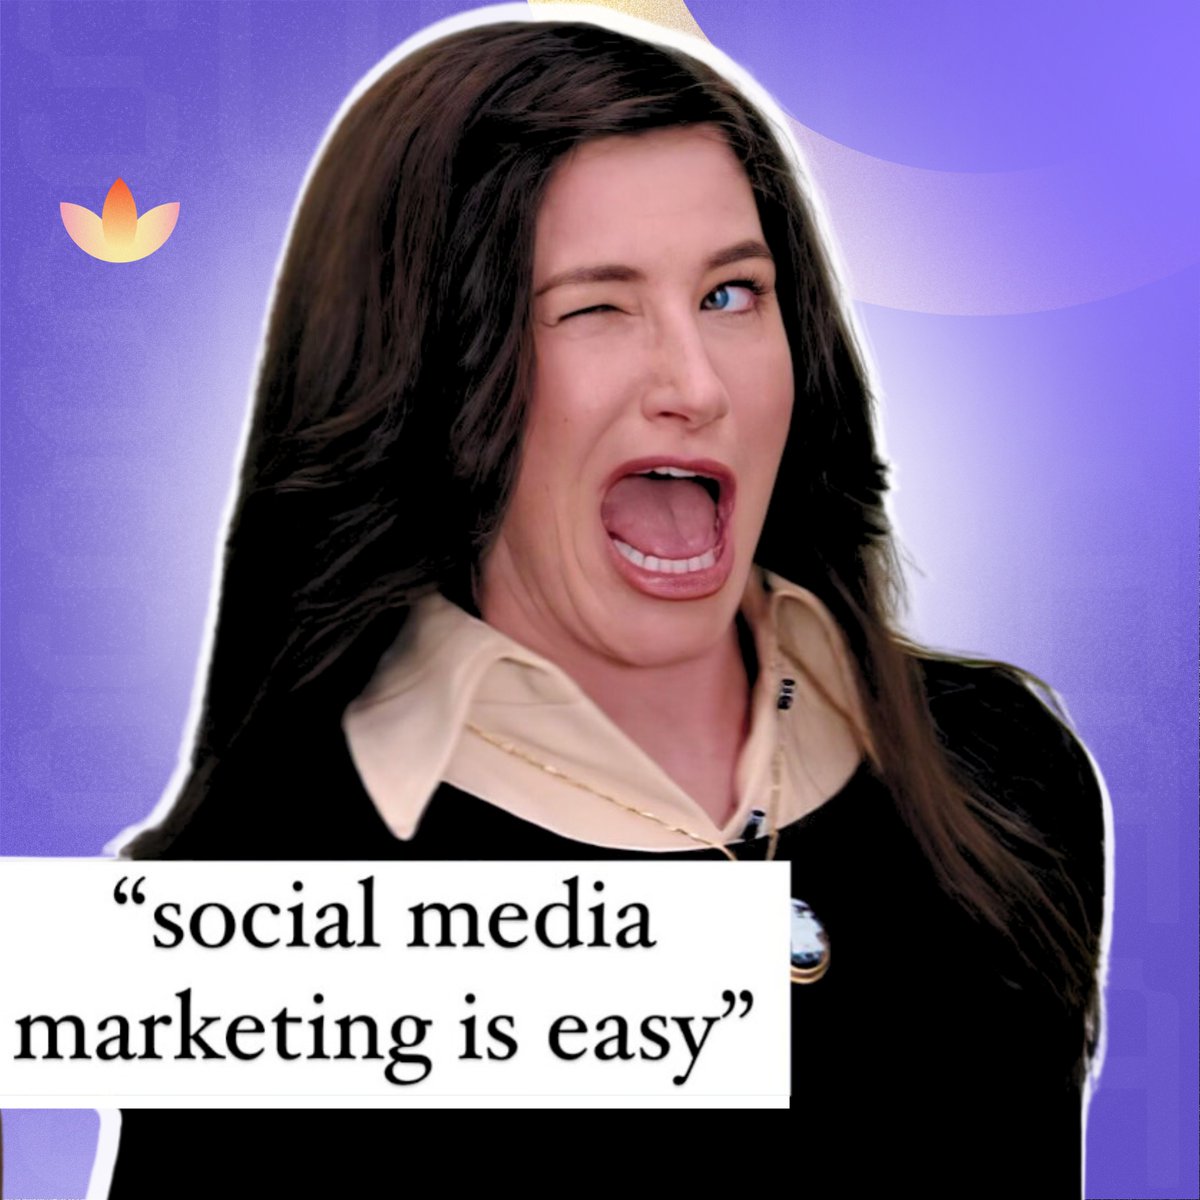 A wink,' Social media marketing is easy.' But behind the wink lies a world of intricacies, strategies, and nuances that form the backbone of a successful online presence.

#socialmediacontent #instagramcontent #instagramgrowthtips #socialmediagrowth #instagramboost #agency #meme